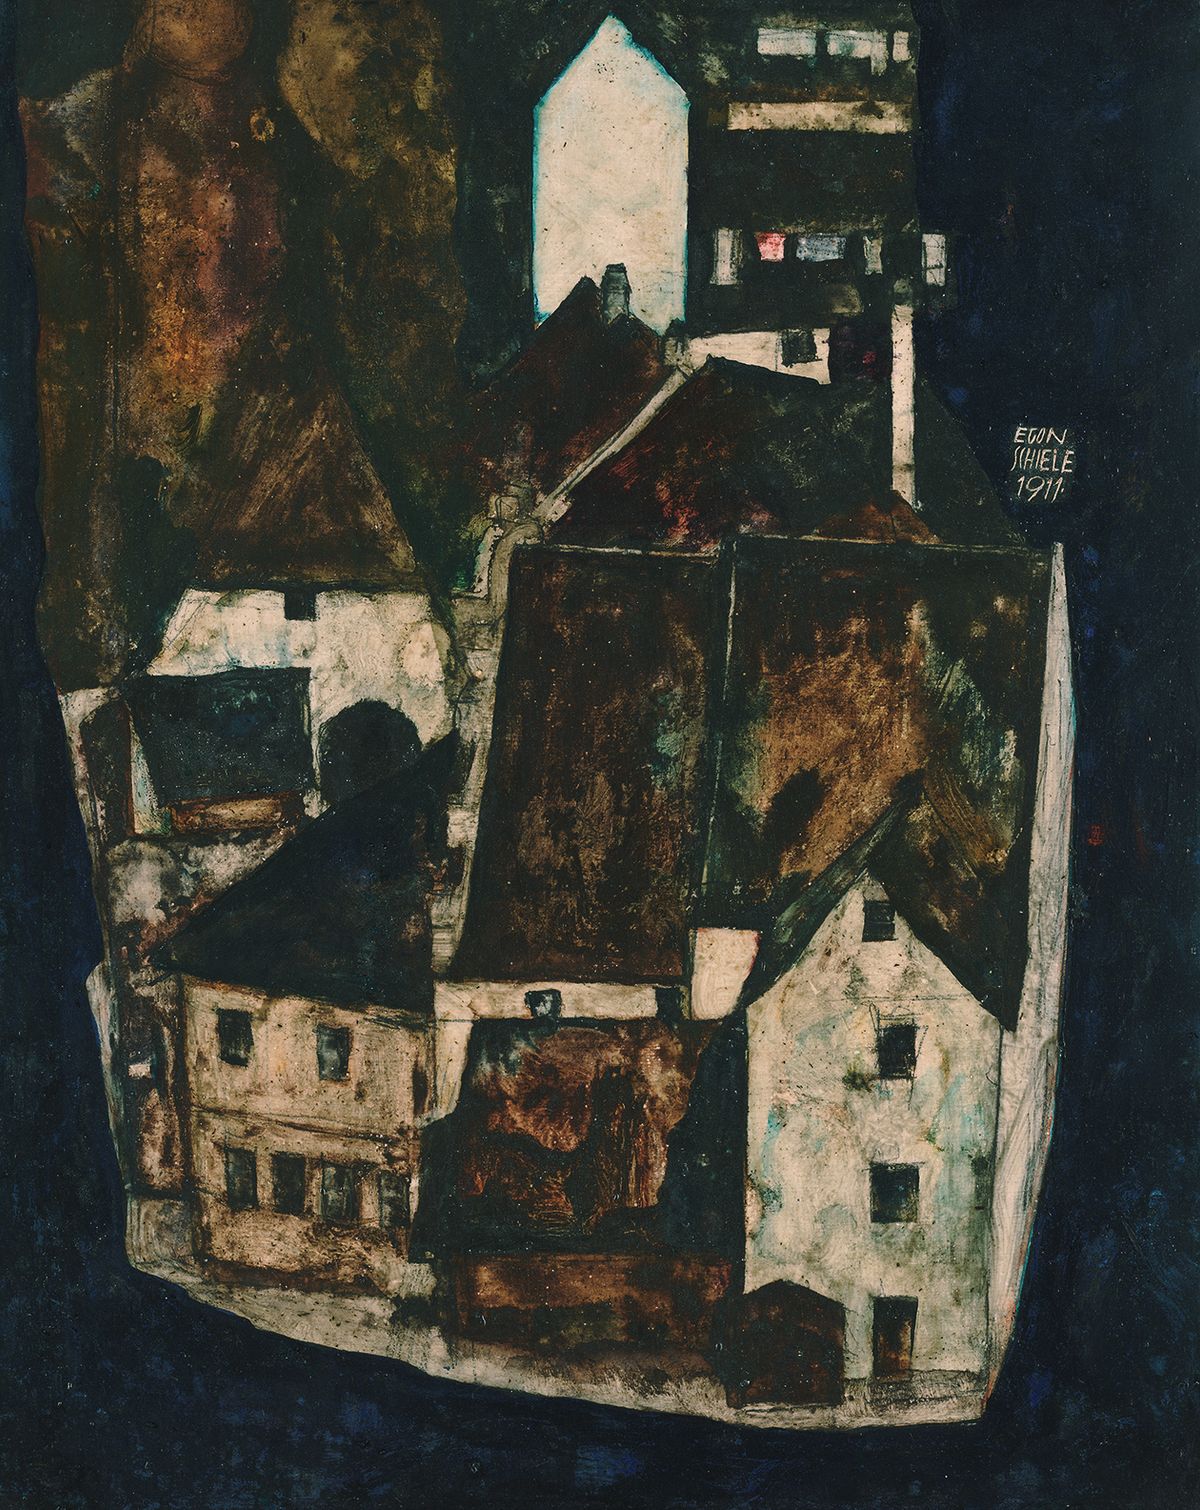 Dead City III (1911), at the Leopold Museum in Vienna, is one of 12 works by Schiele named in the law suit; Fritz Grünbaum’s collection included more than 80 works by the artist
© Leopold Museum, Vienna